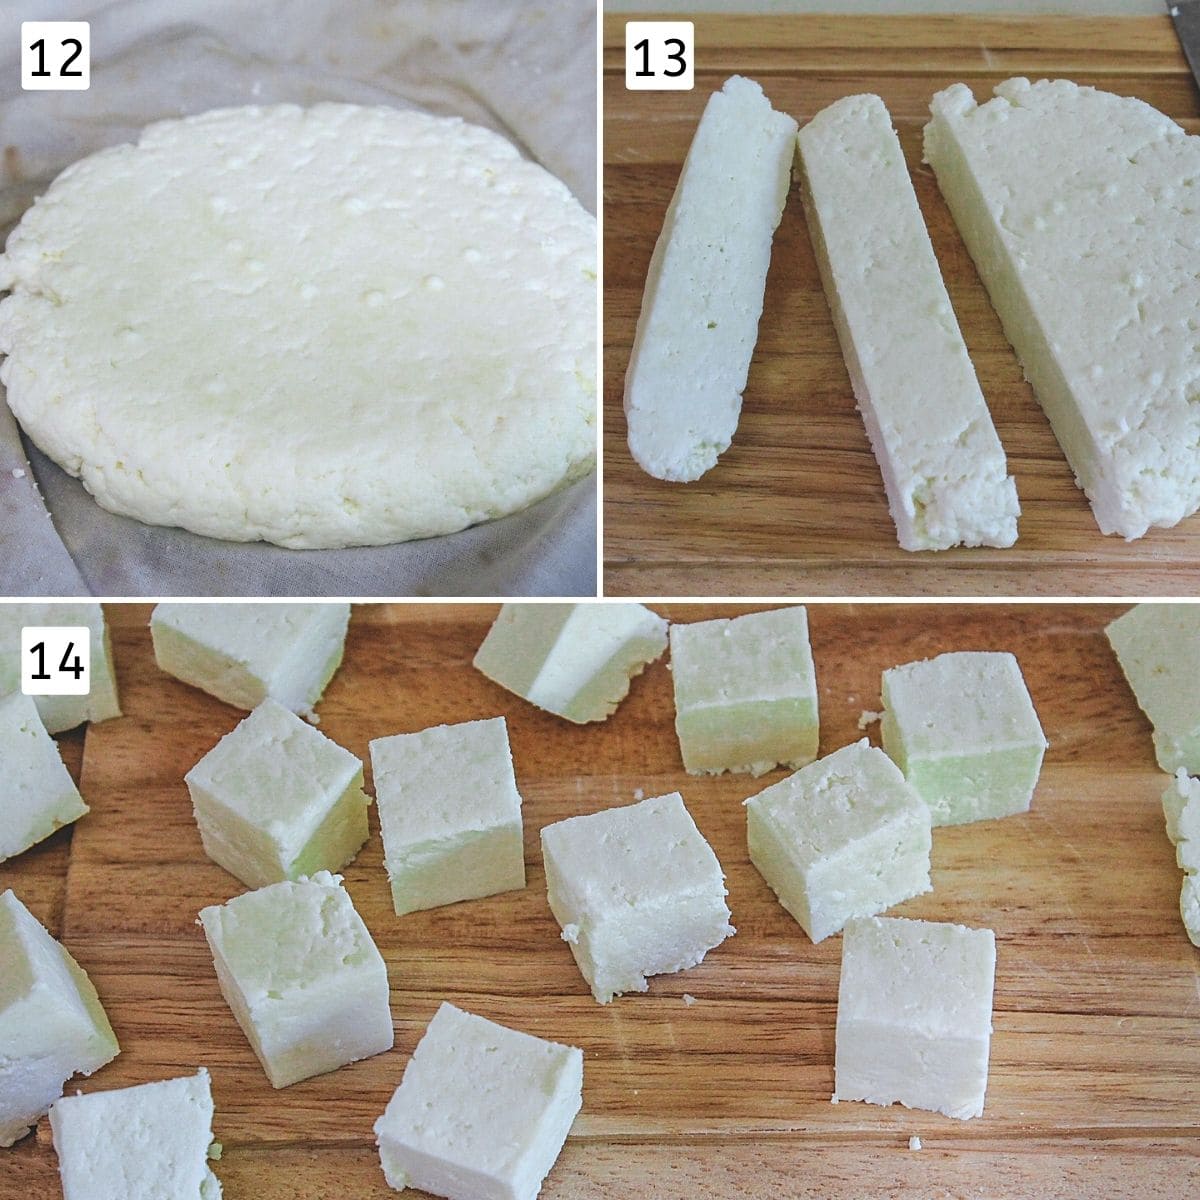 Collage of 3 images showing paneer blocks, cut into strips and the cut into paneer cubes.